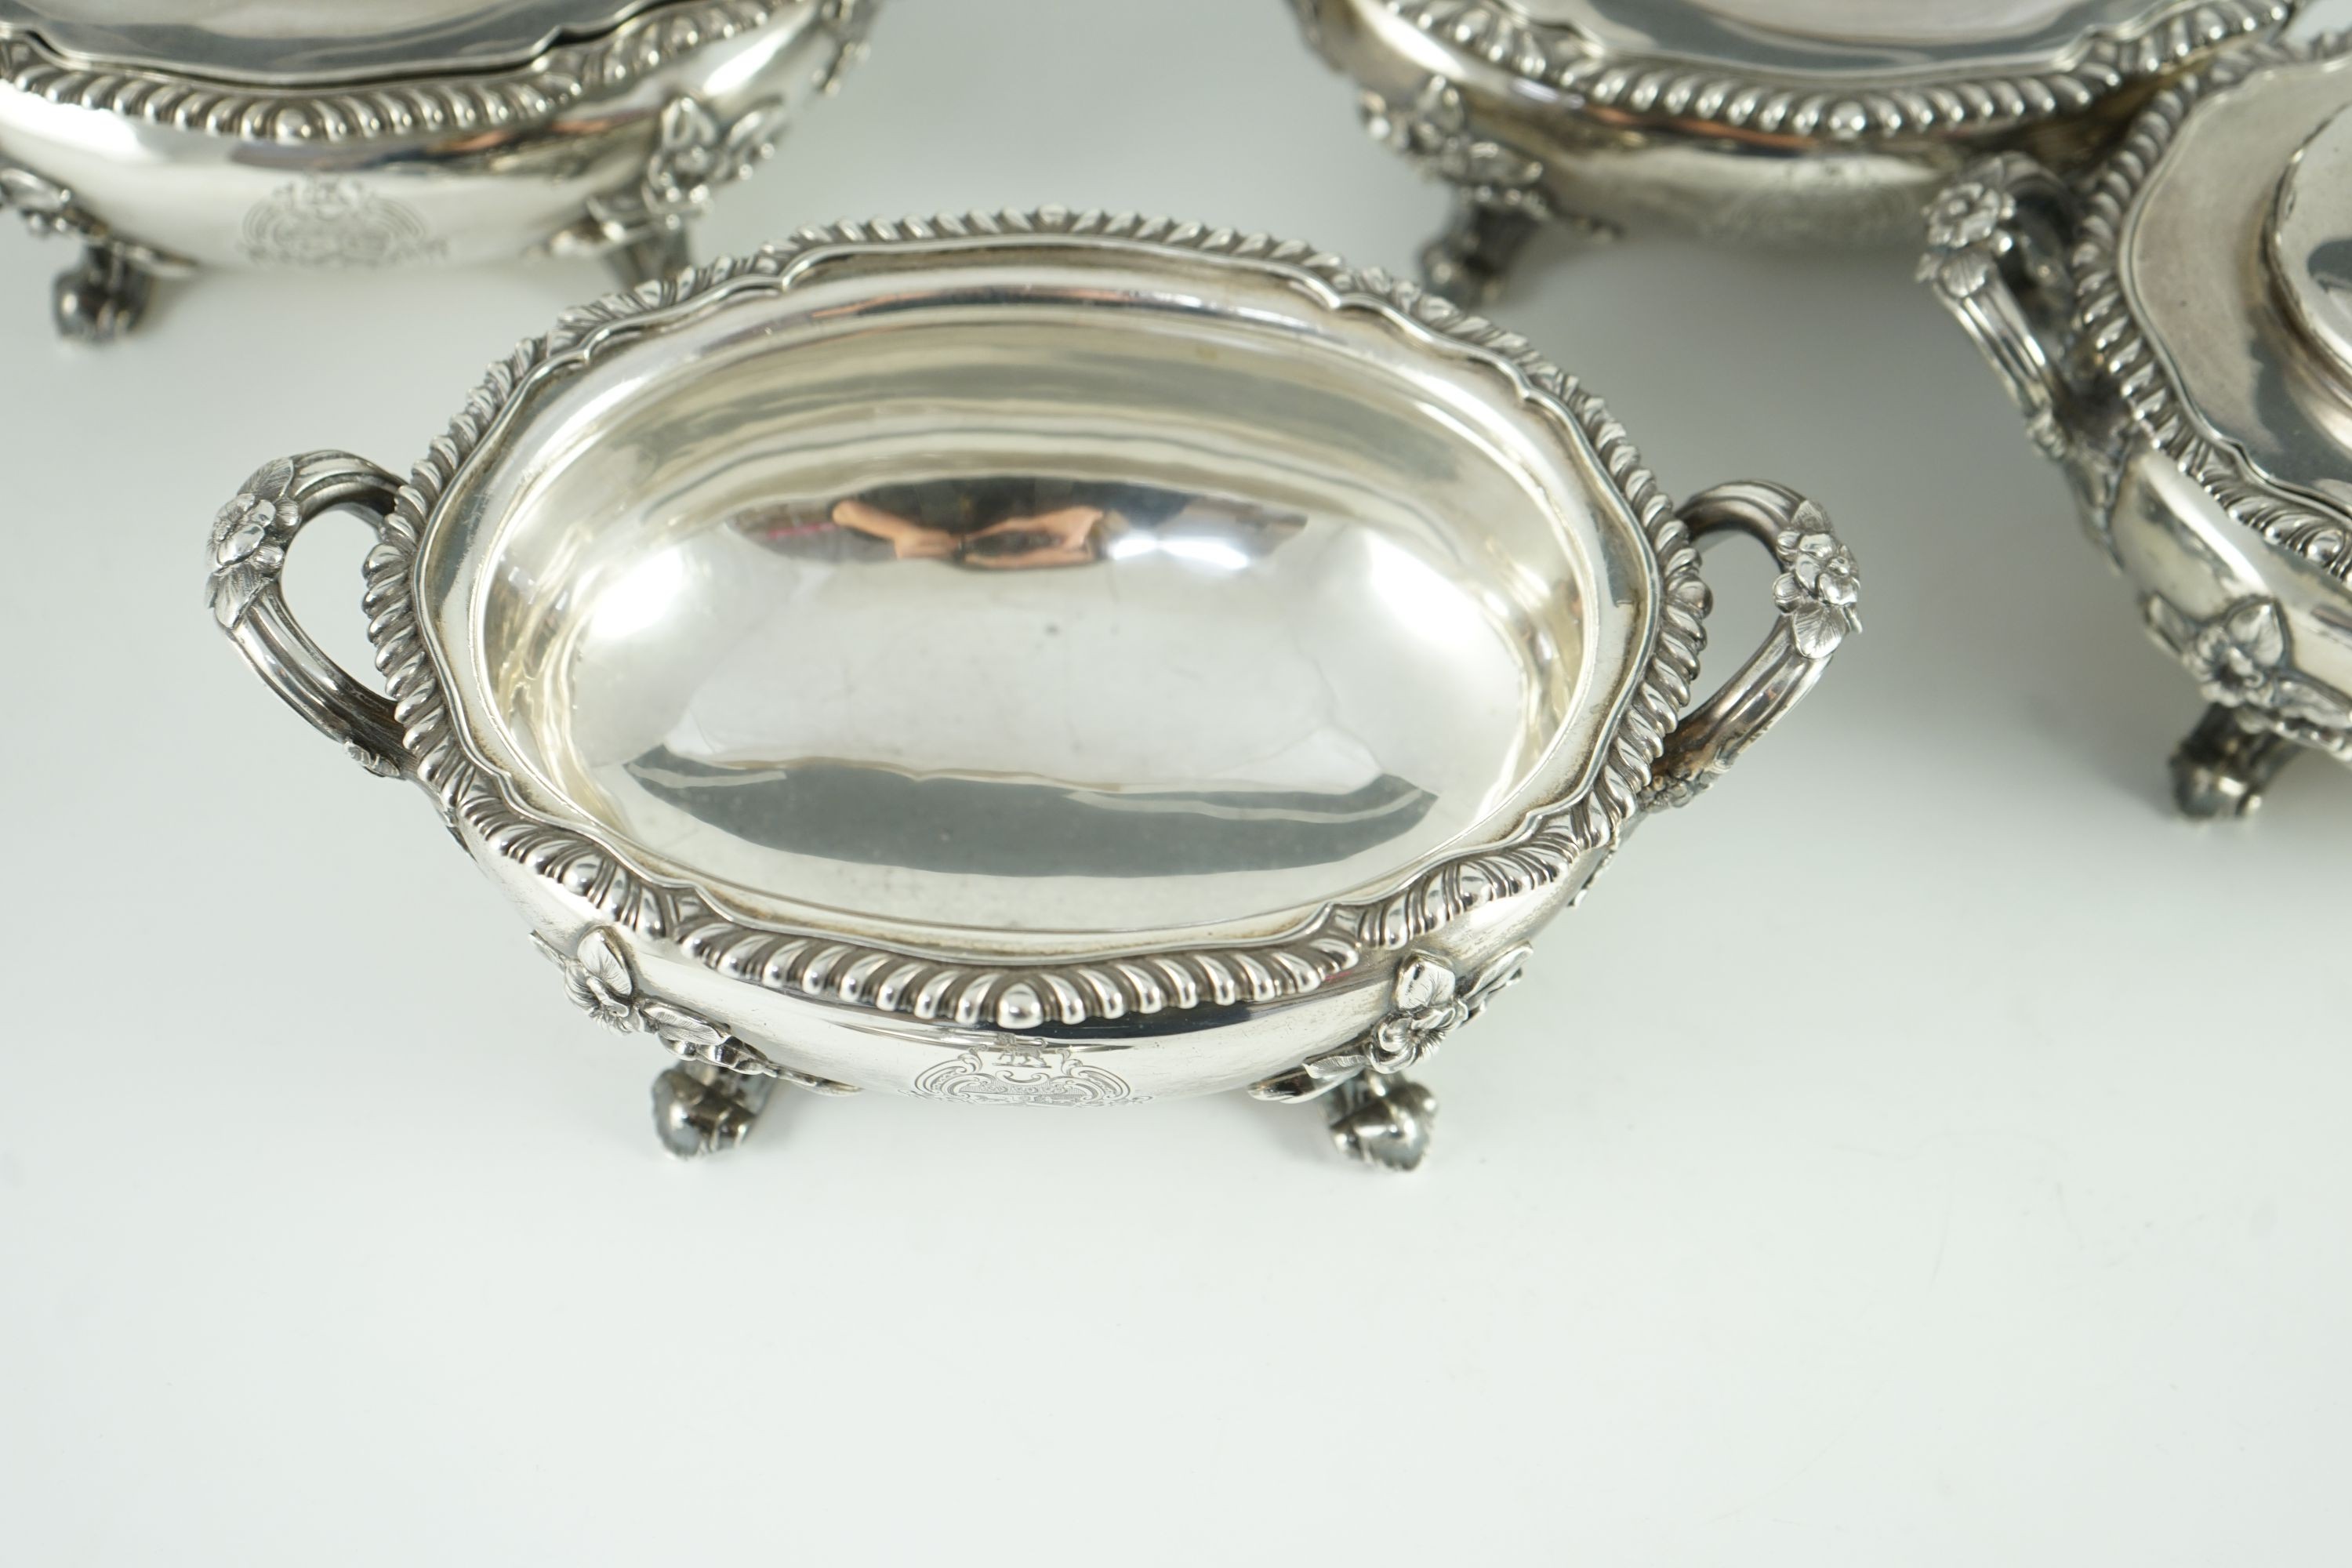 A good set of four Victorian silver two handled oval sauce tureens and covers, by Edward & John Barnard